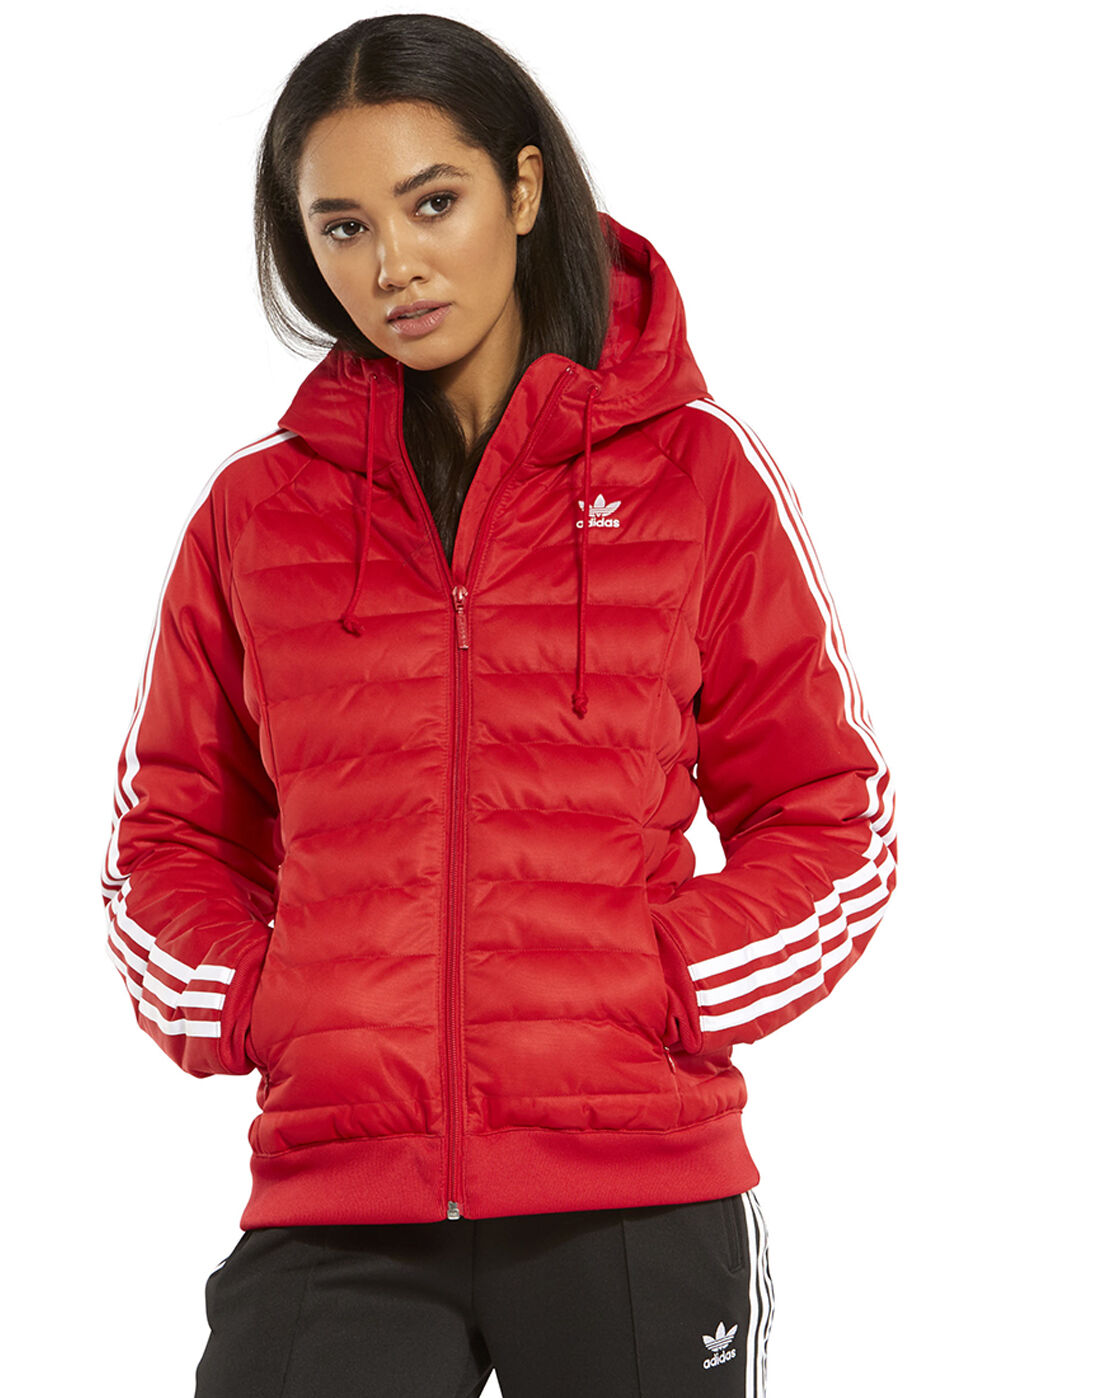 full adidas outfit women's